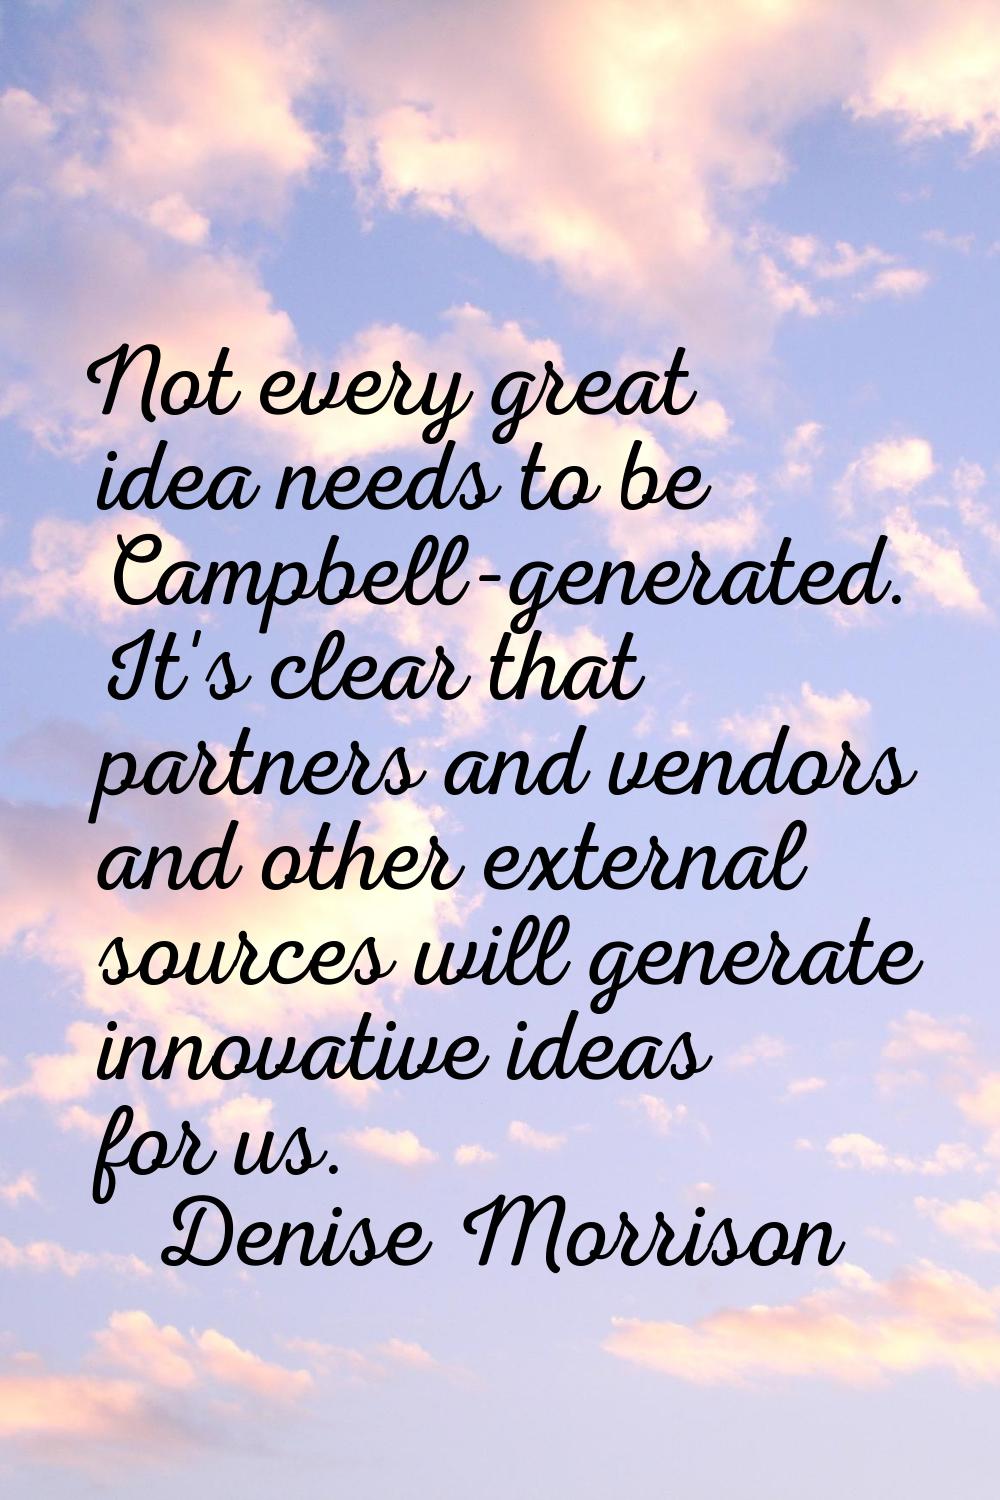 Not every great idea needs to be Campbell-generated. It's clear that partners and vendors and other